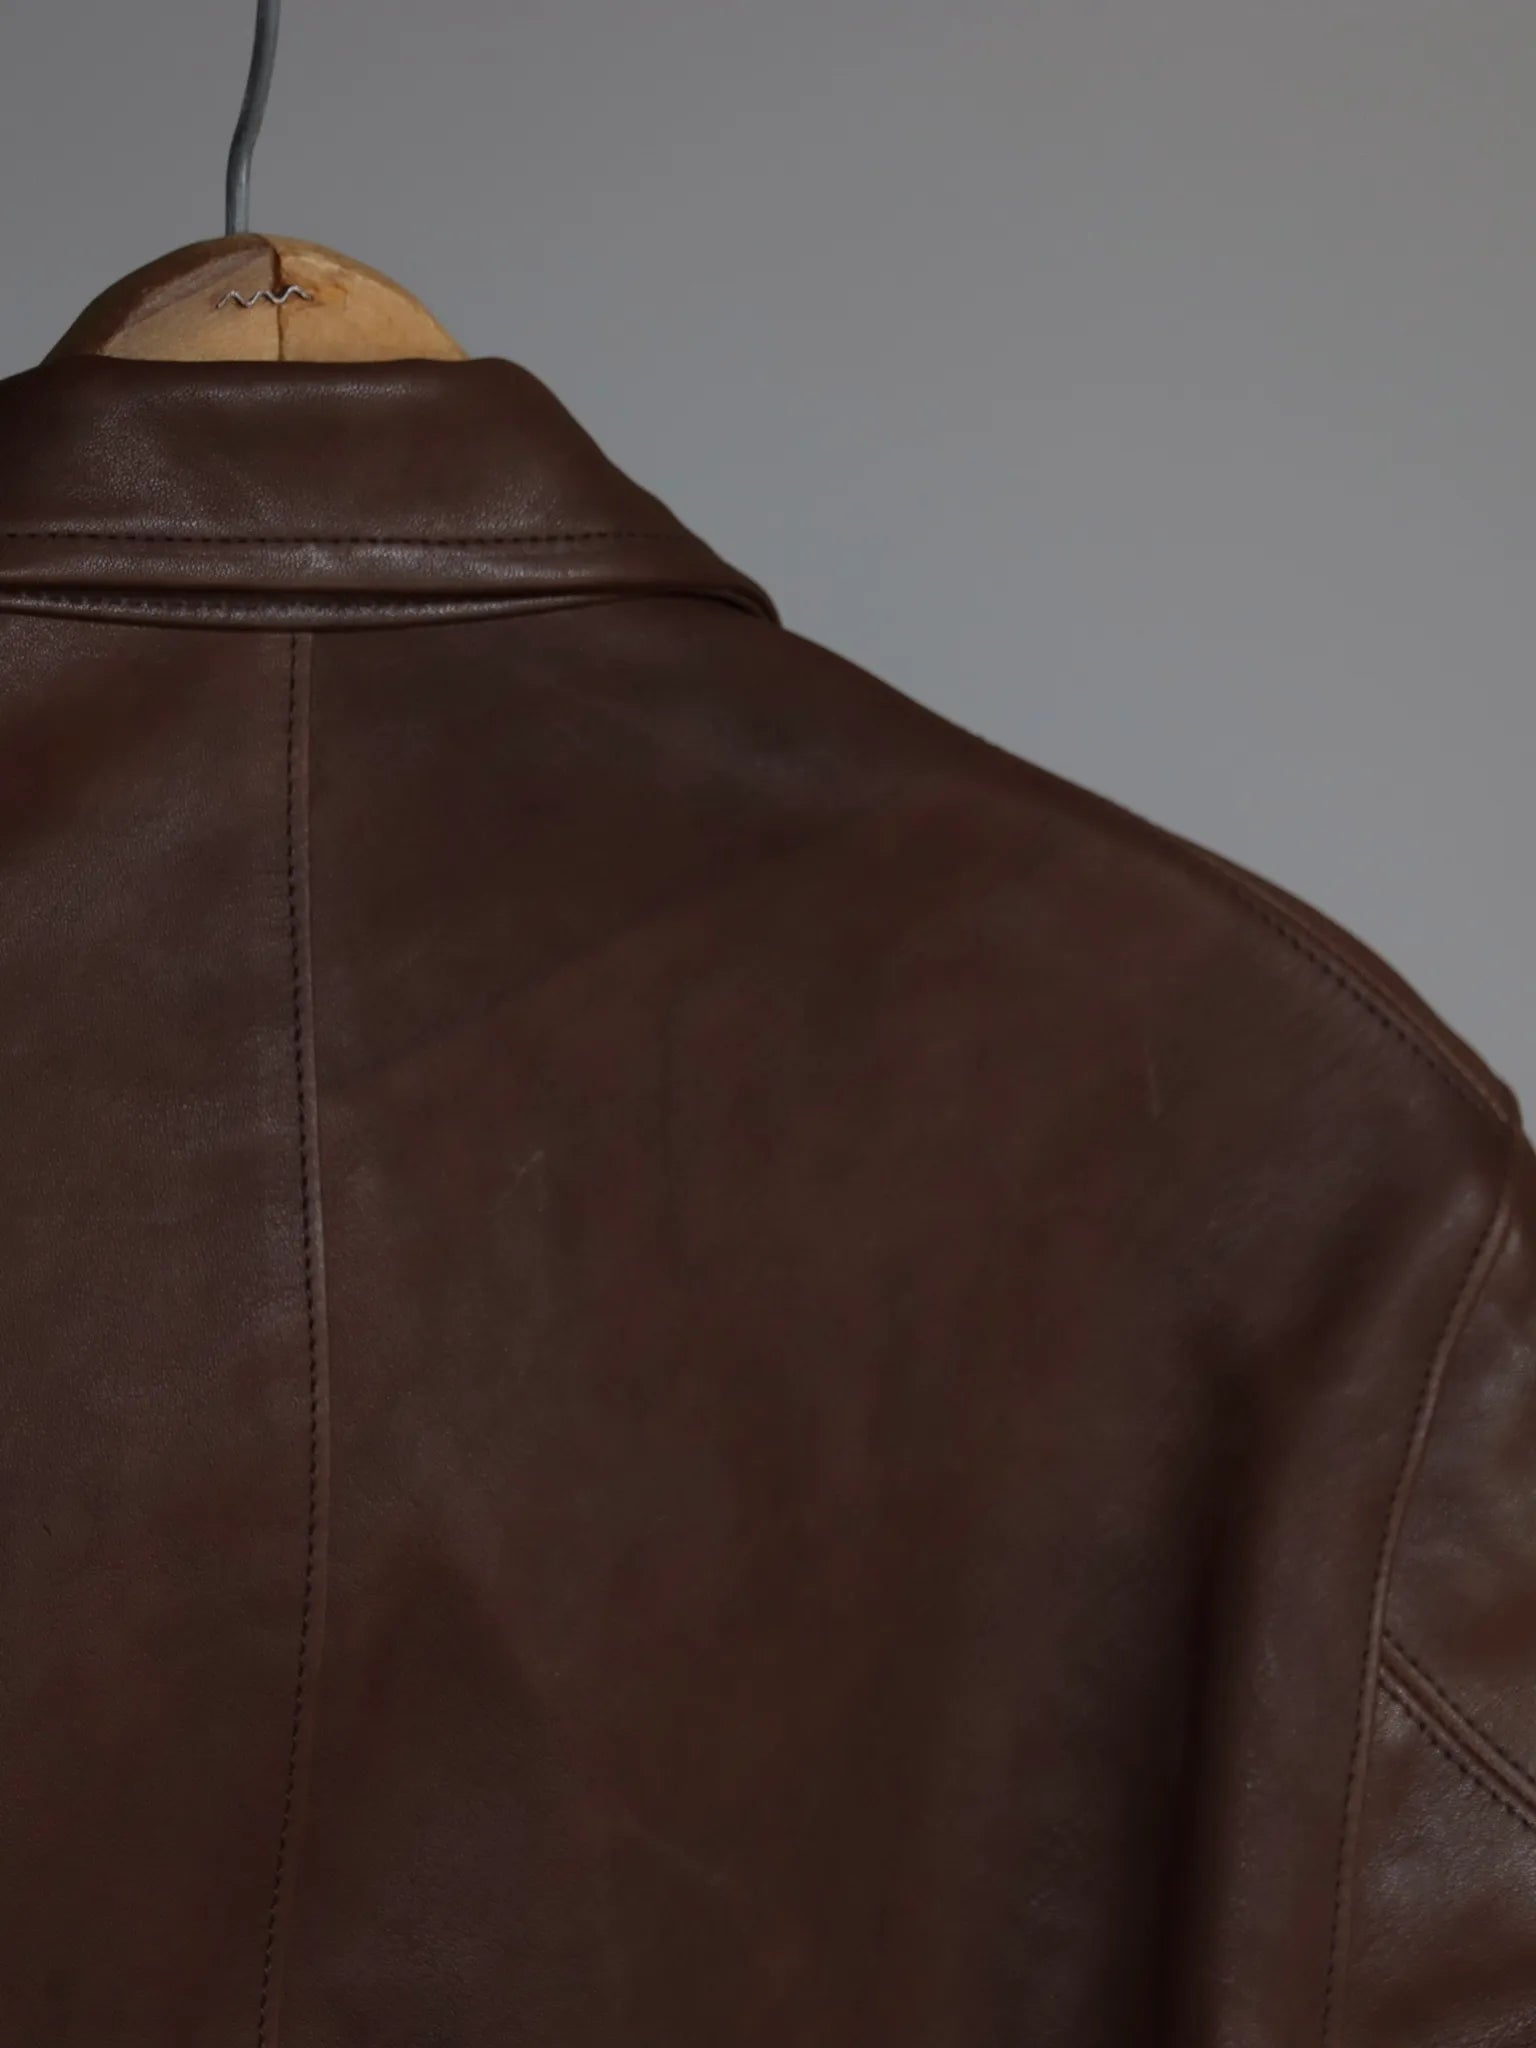 t-t-sack-leather-coat-mud-dyed-brown-4